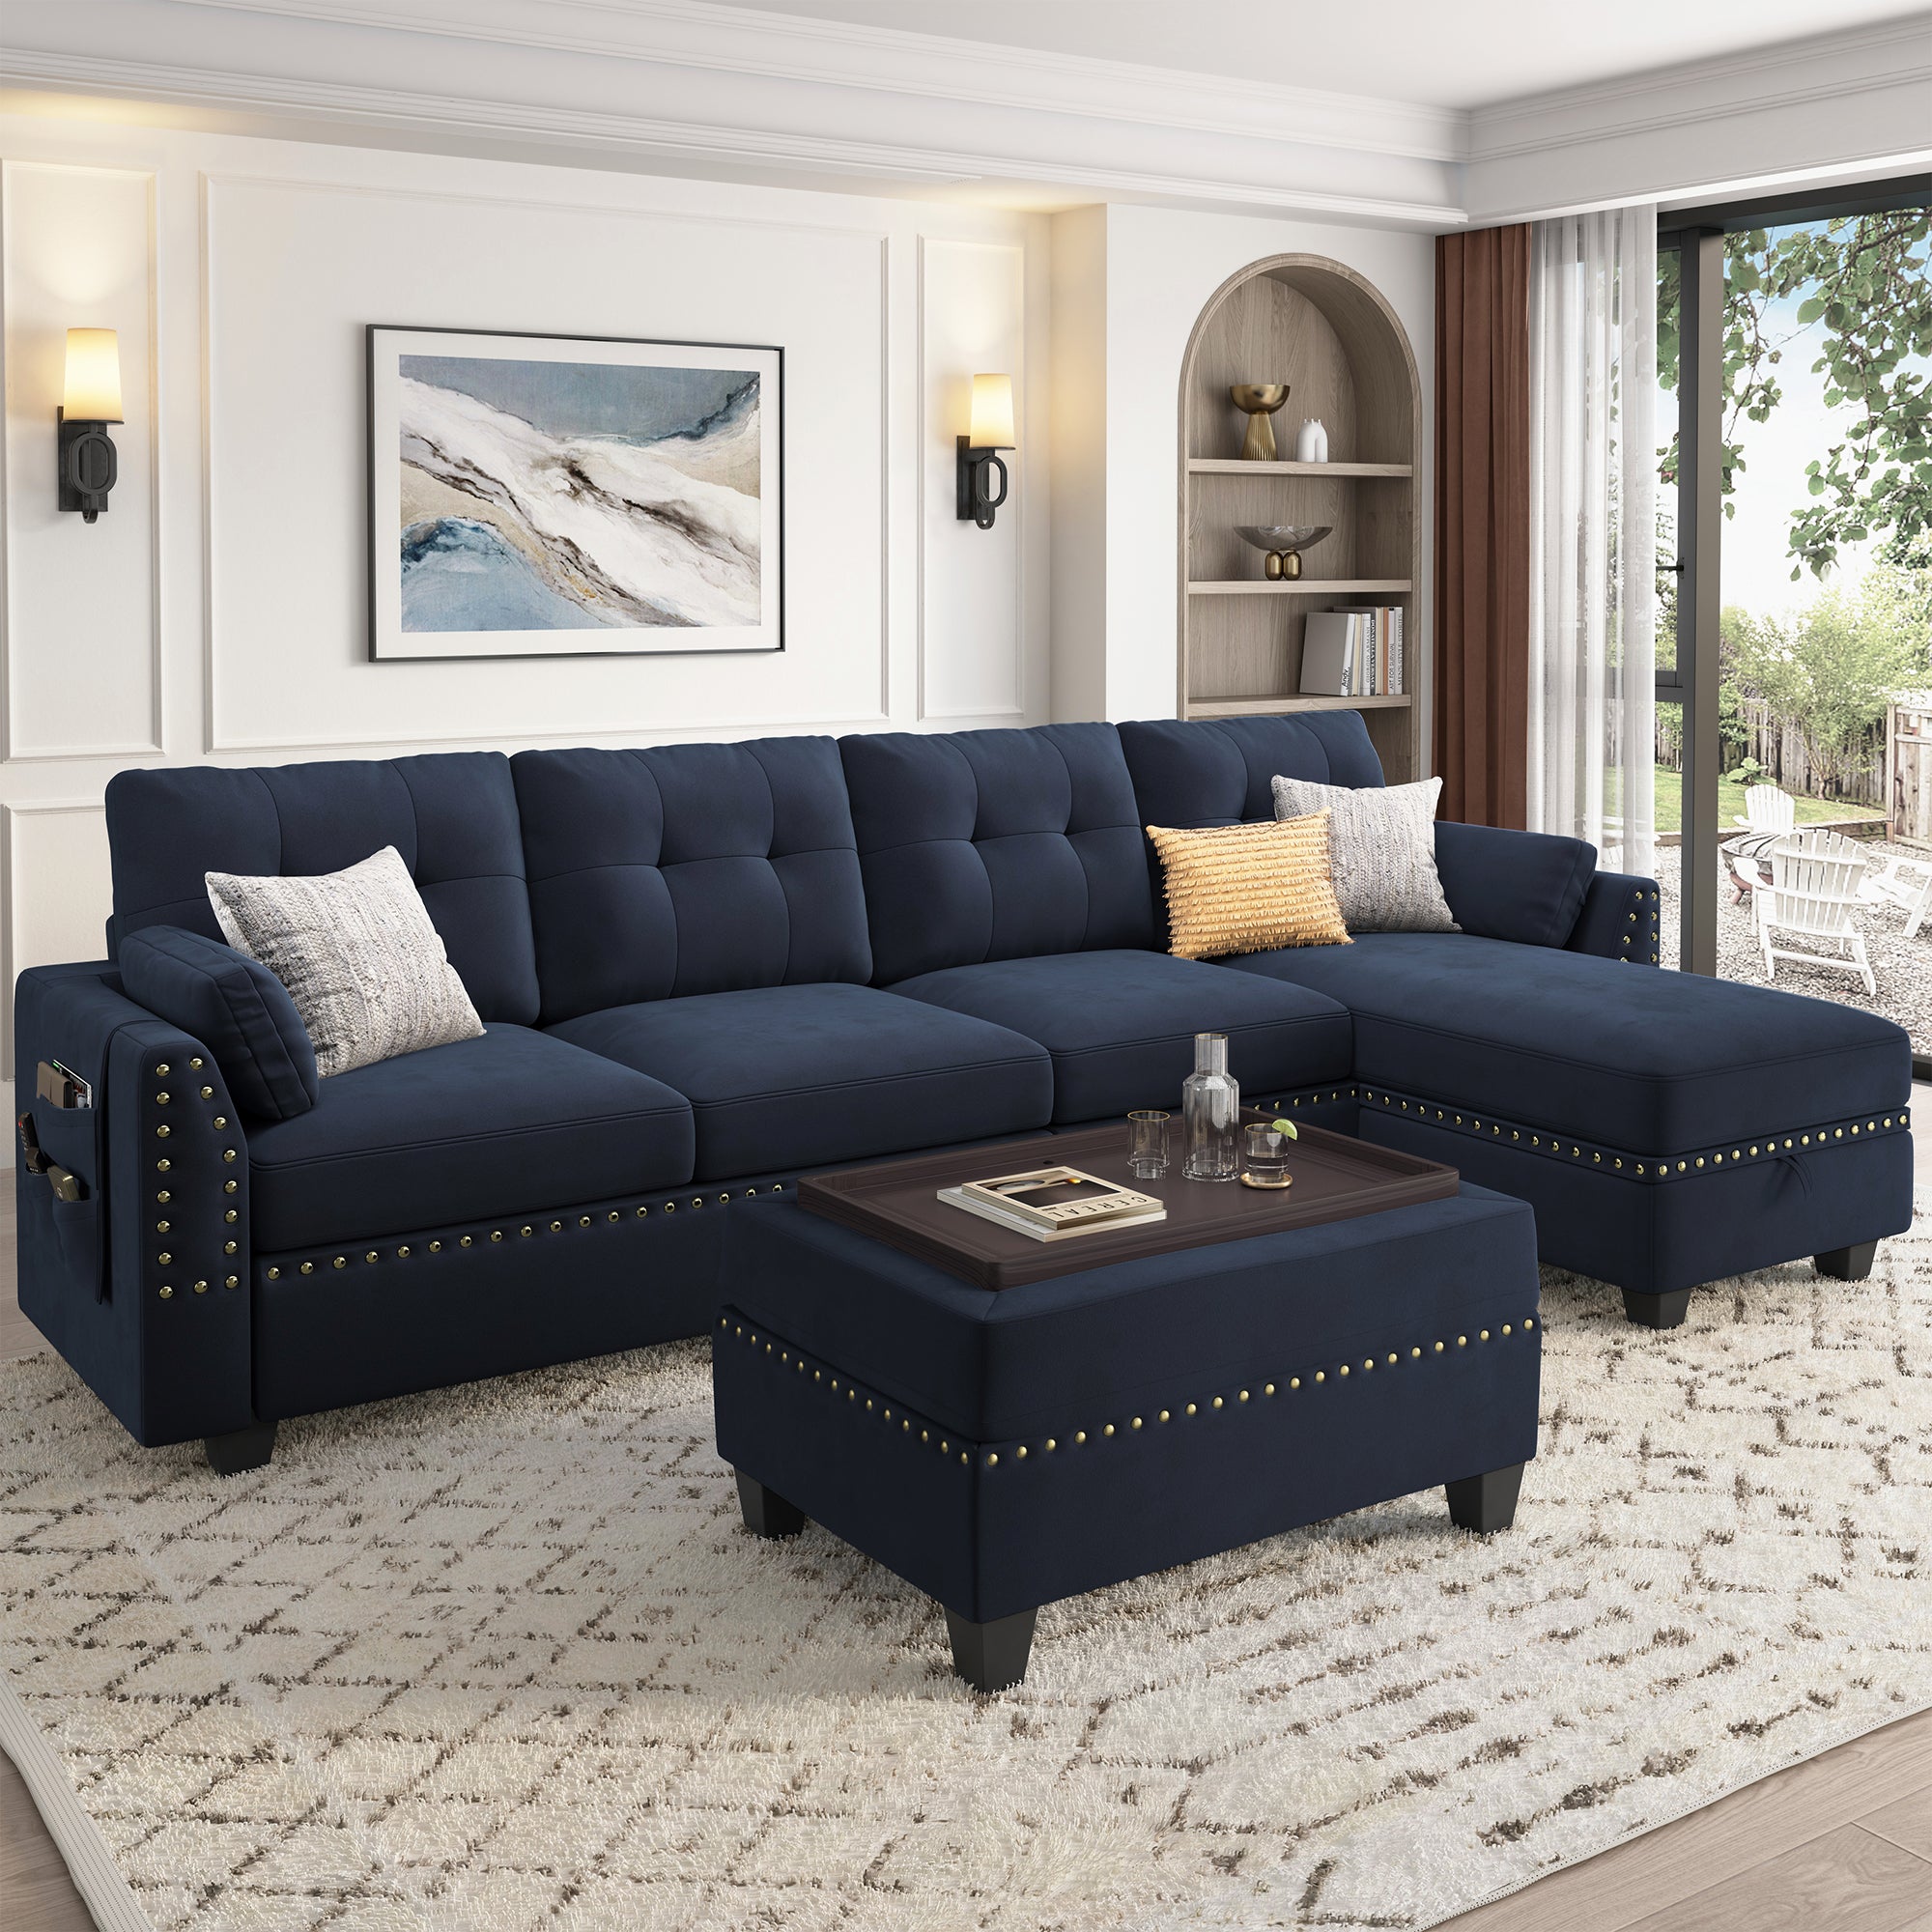 HONBAY Velvet 4-Seat L-Shaped Sectional Sofa with Table Ottoman Set